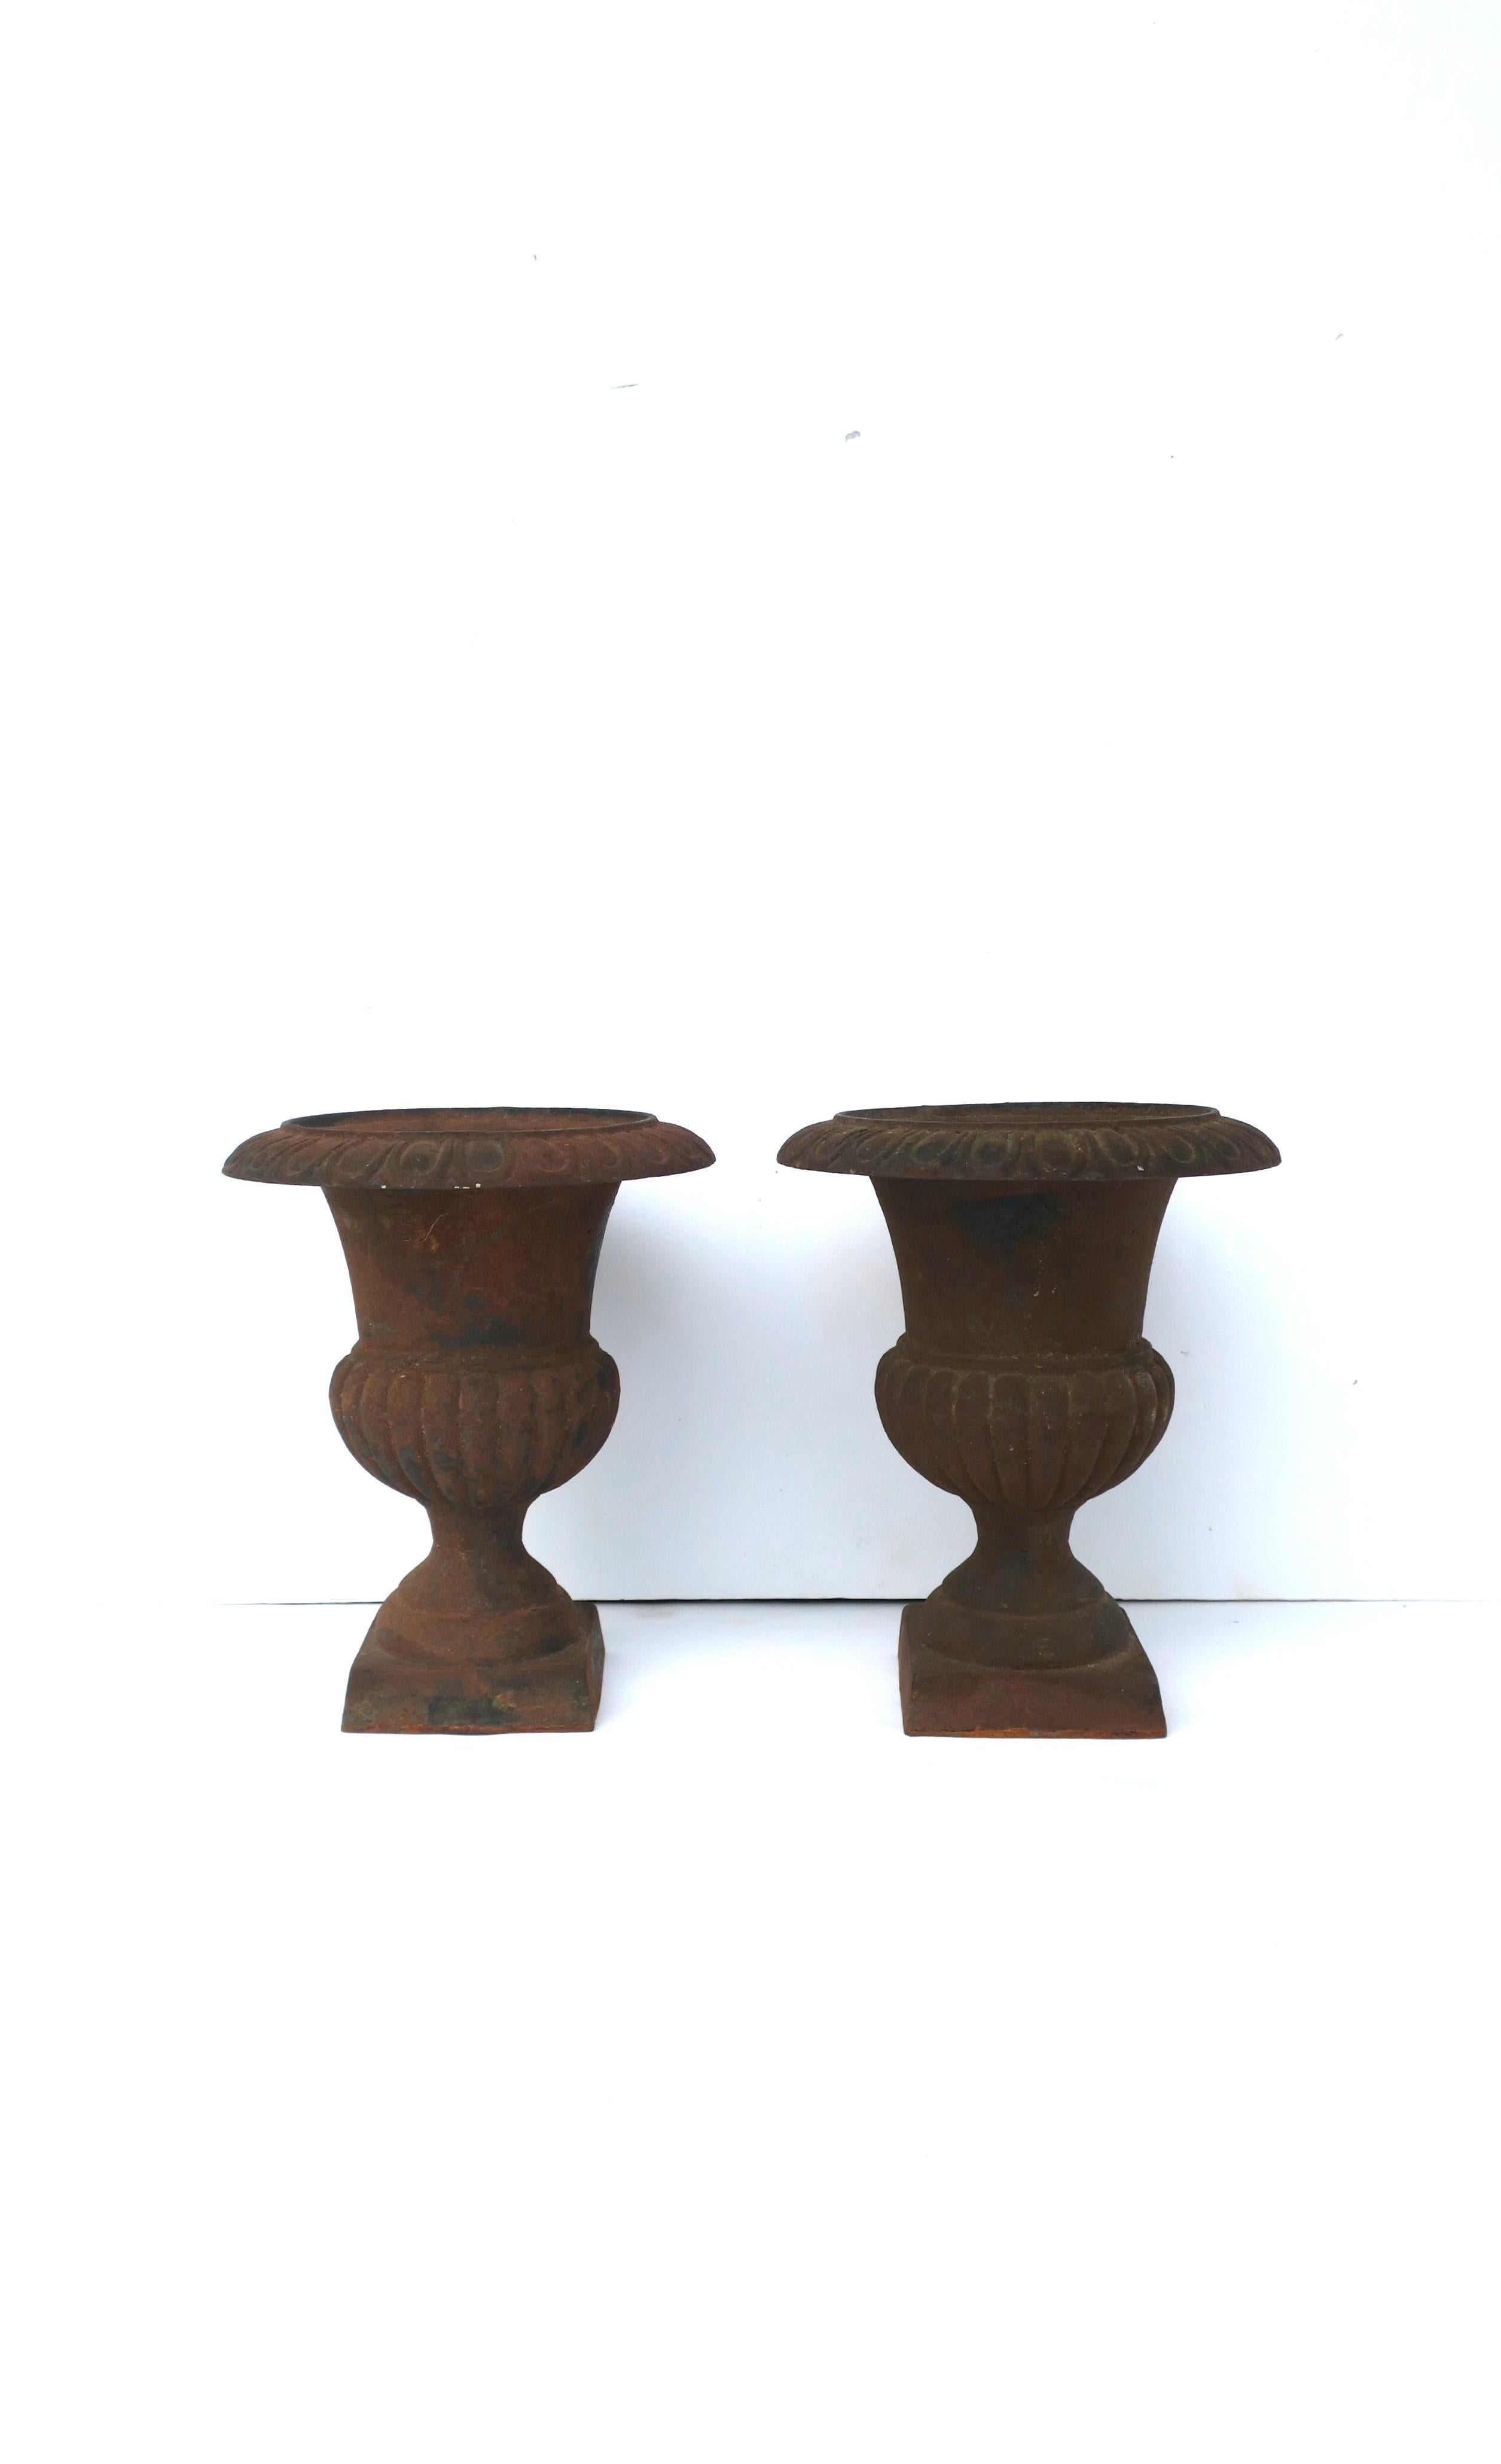 20th Century Neoclassical Iron Urns Flower or Plant Planters Jardinières, Pair For Sale